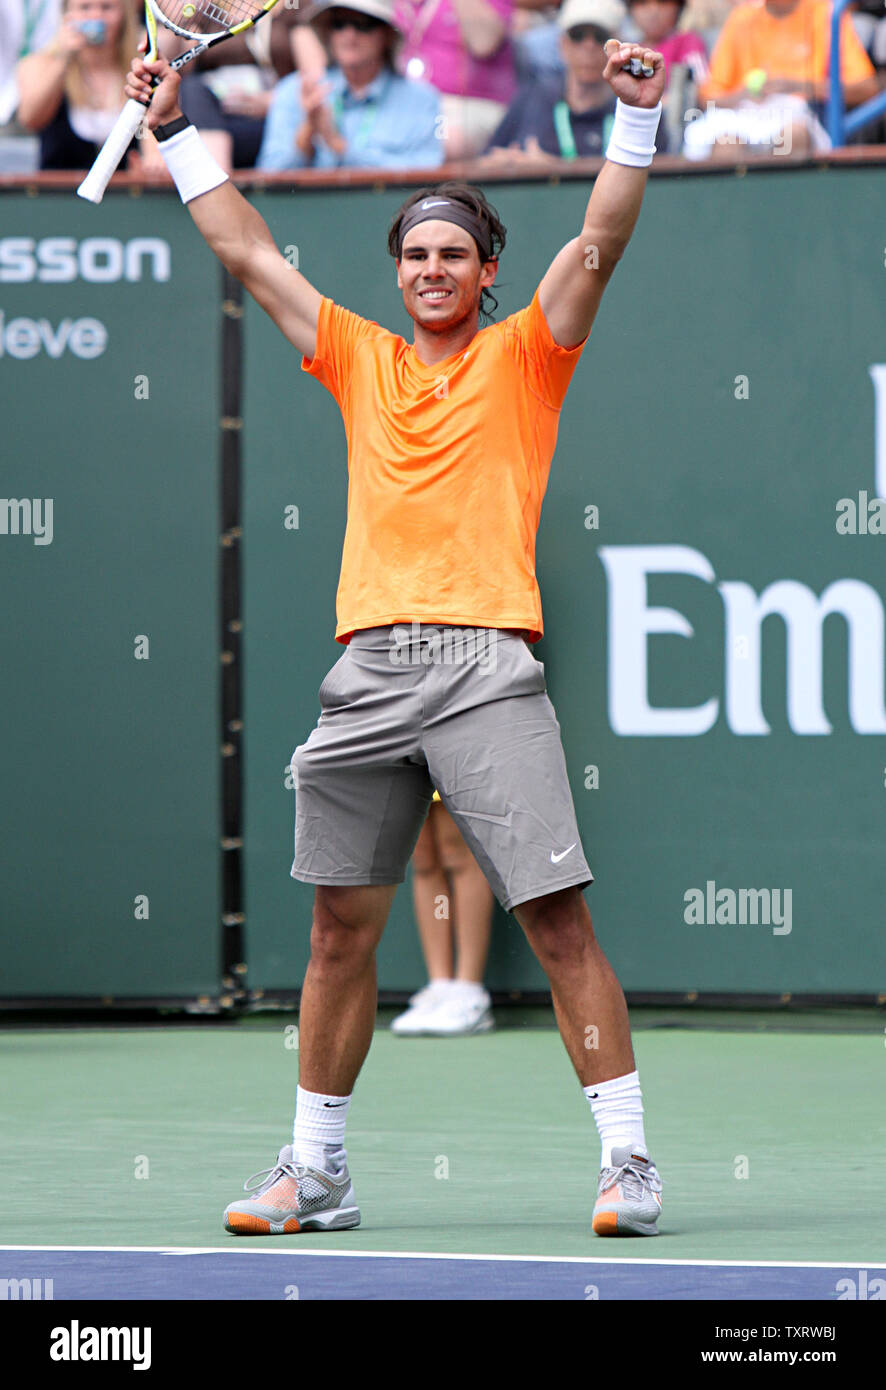 Spaniard Rafael Nadal celebrates after winning his mens semi-final match against Argentine Juan Martin Del Potro at the BNP Paribas Open in Indian Wells, California on March 19, 2011.  Nadal defeated Del Potro 6-4, 6-4 to advance to the tournament final.   UPI/David Silpa Stock Photo